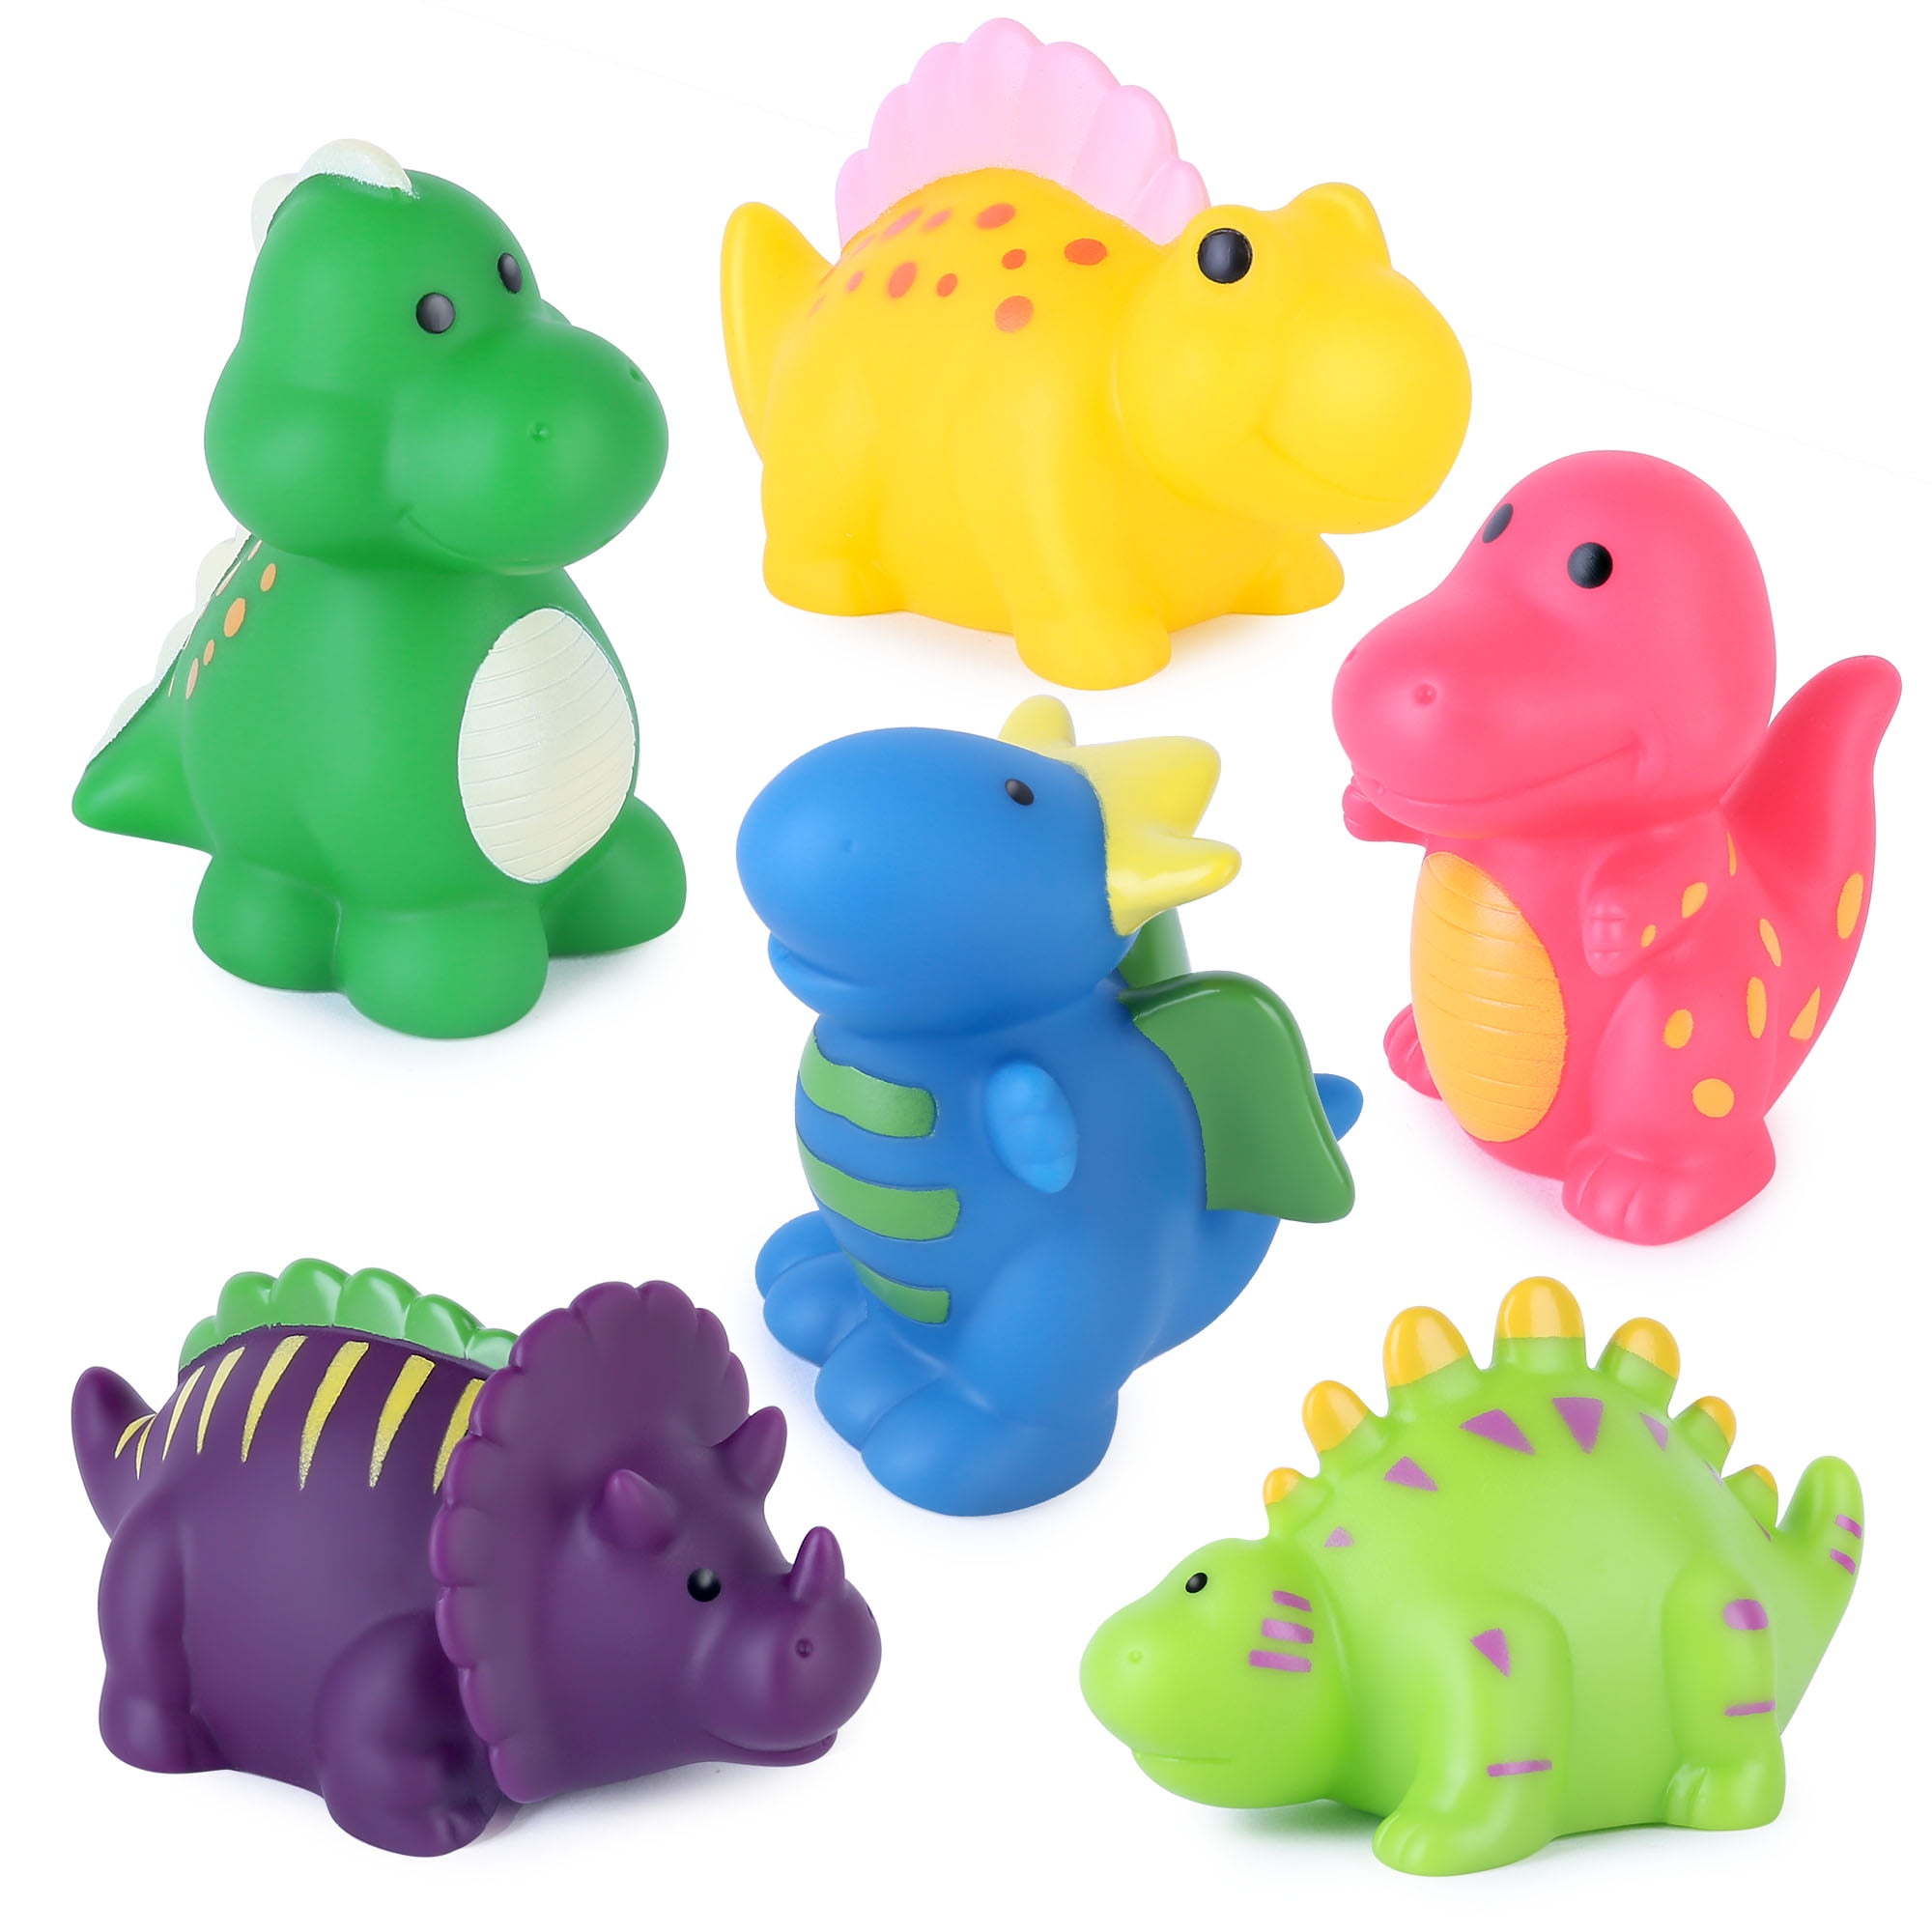 LotFancy Bath Toys For Toddlers 1-3, Mold Free Bath Toys For Infants 6-12  Months, 8PCS No Holes Animal Bathtub Toys For Kids Ages 4-8, Soft No Mold